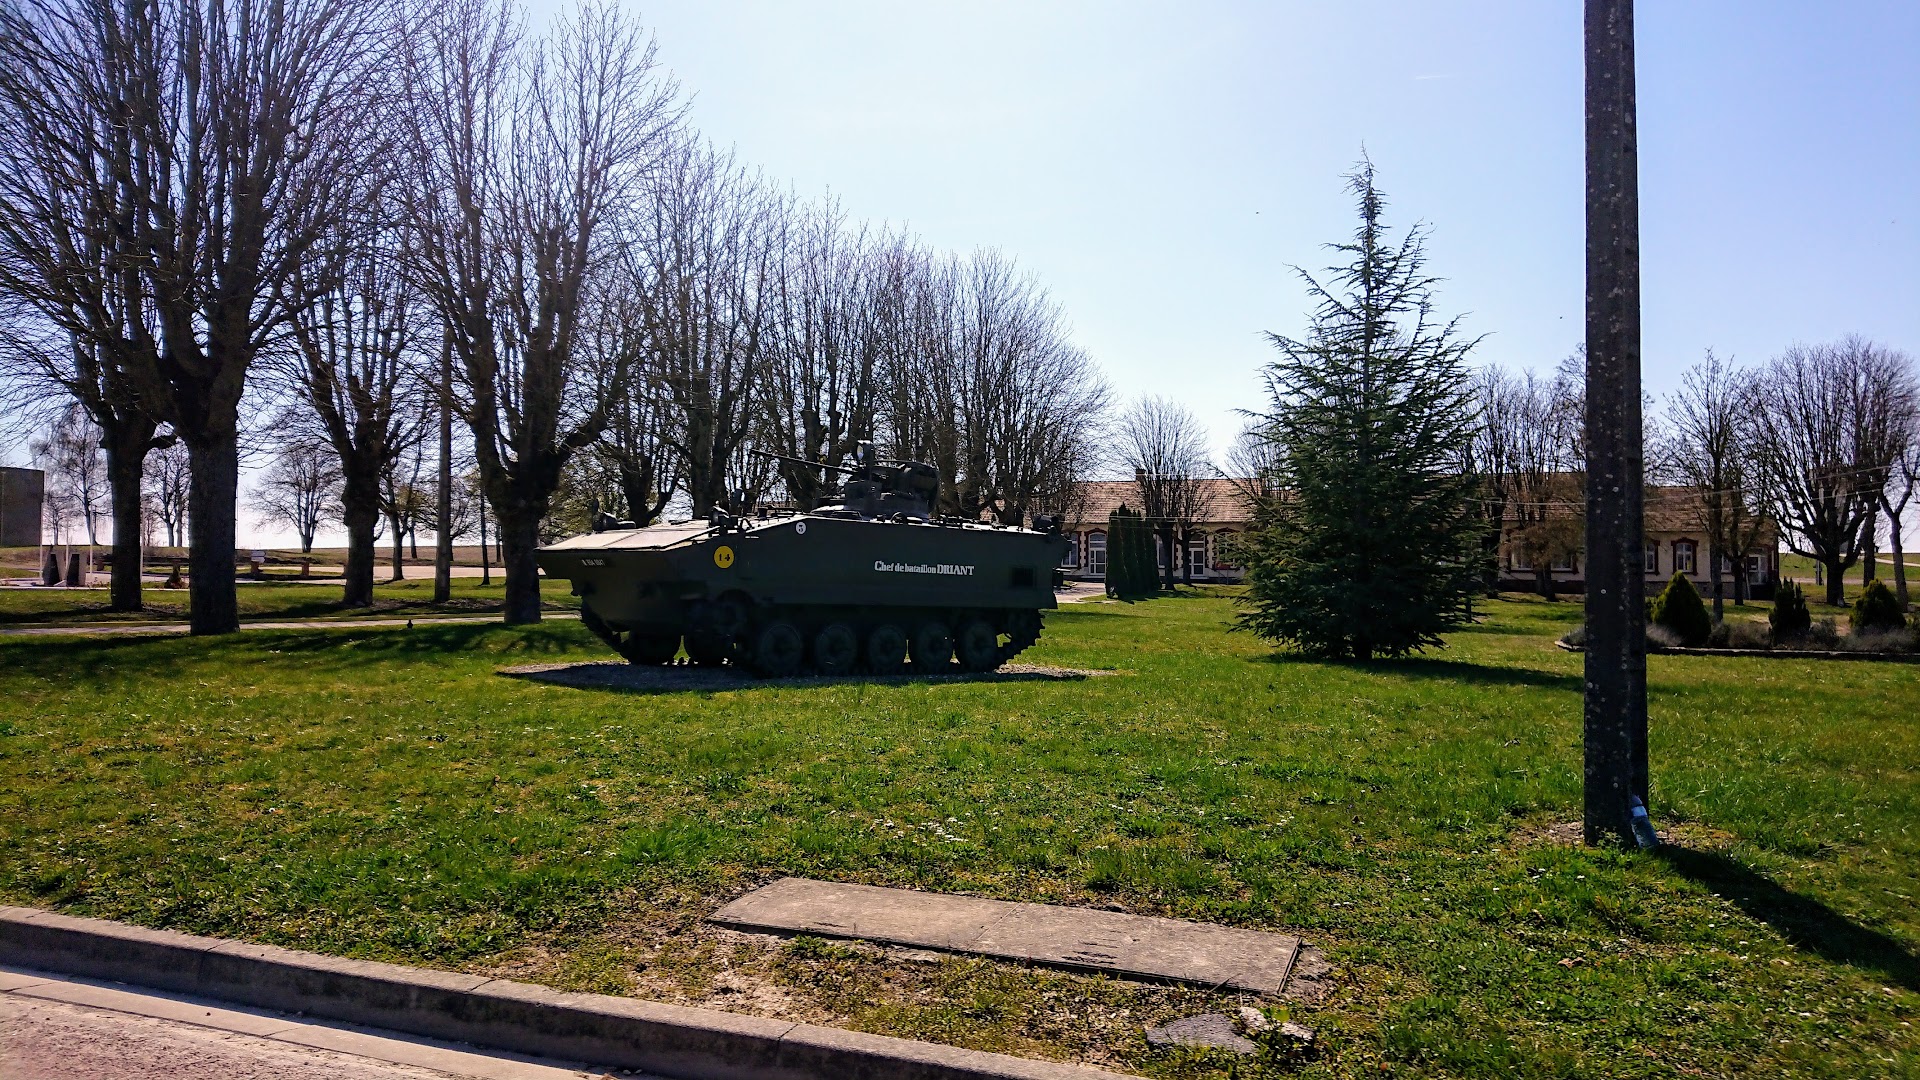 Camp militaire de Mailly